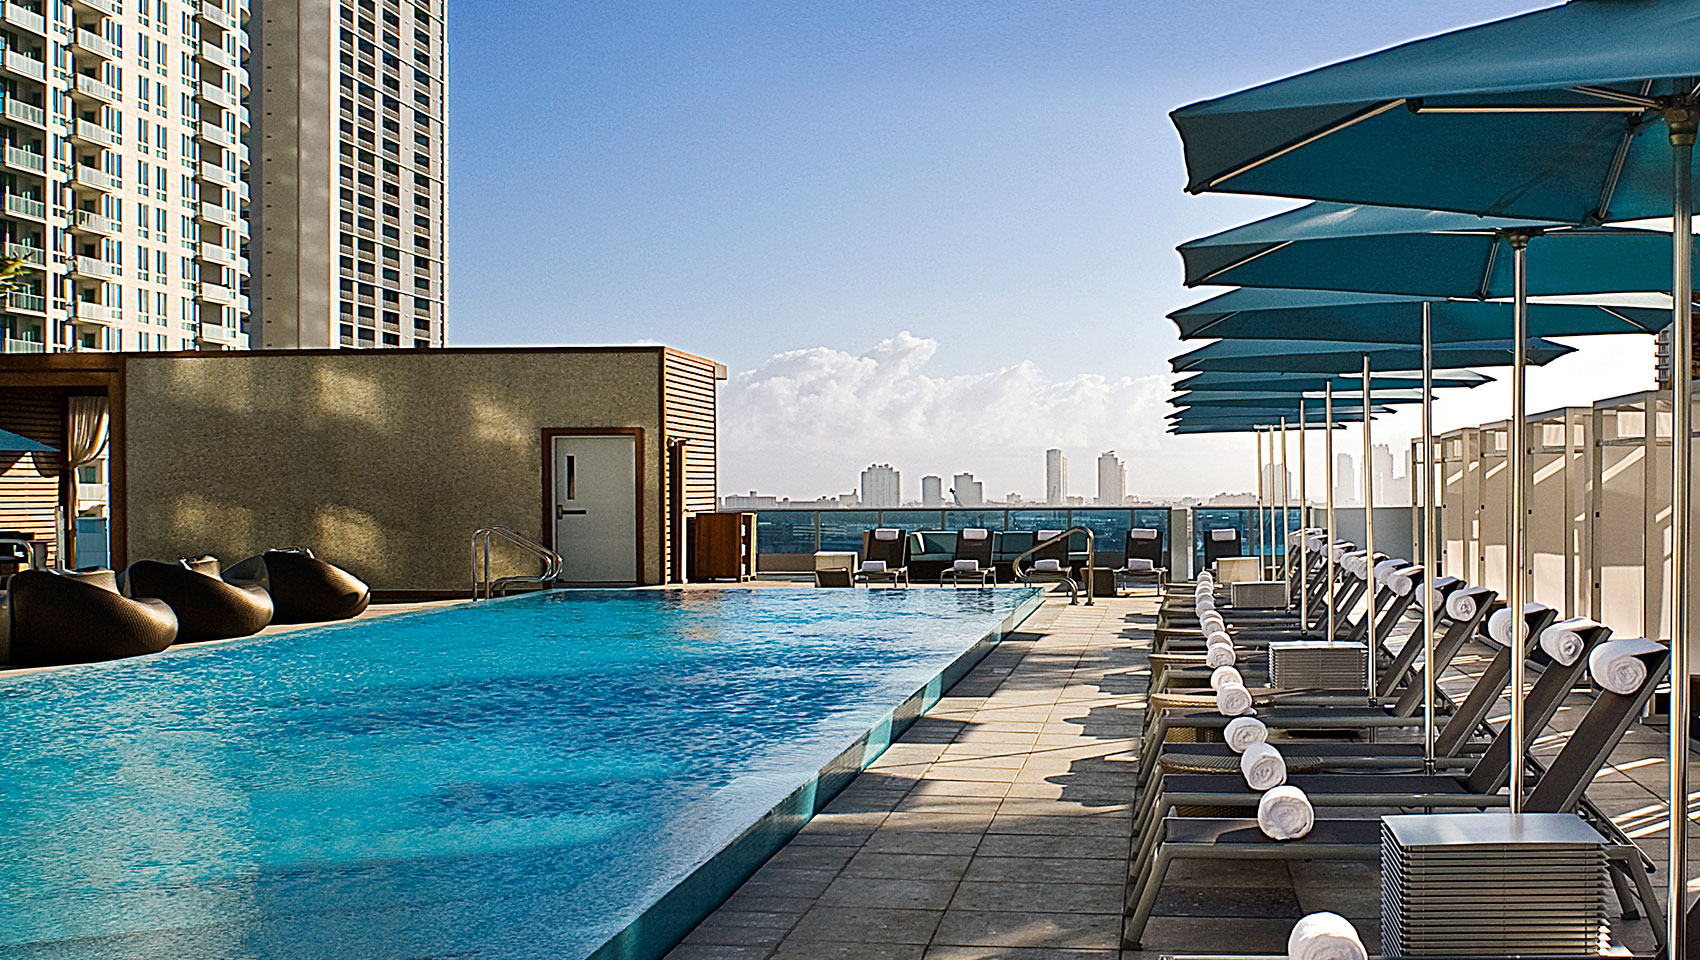 Rooftop pool at Kimpton EPIC Hotel in miami